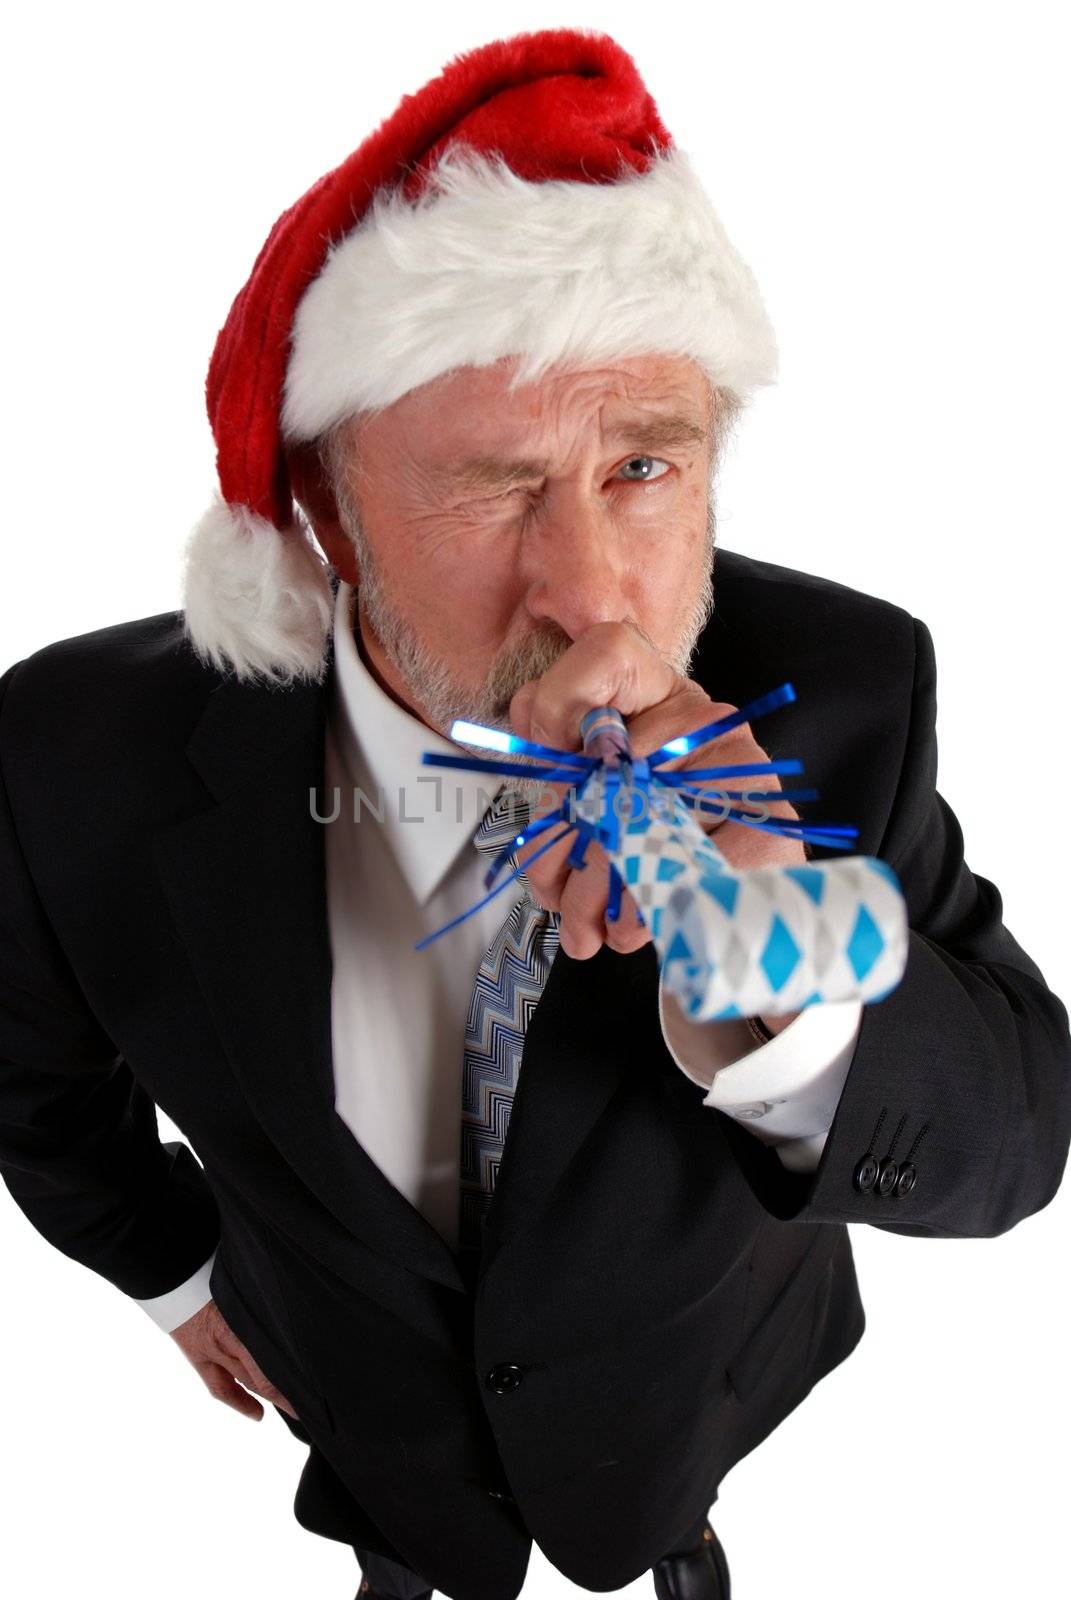 Business man in santa hat blowing party blower